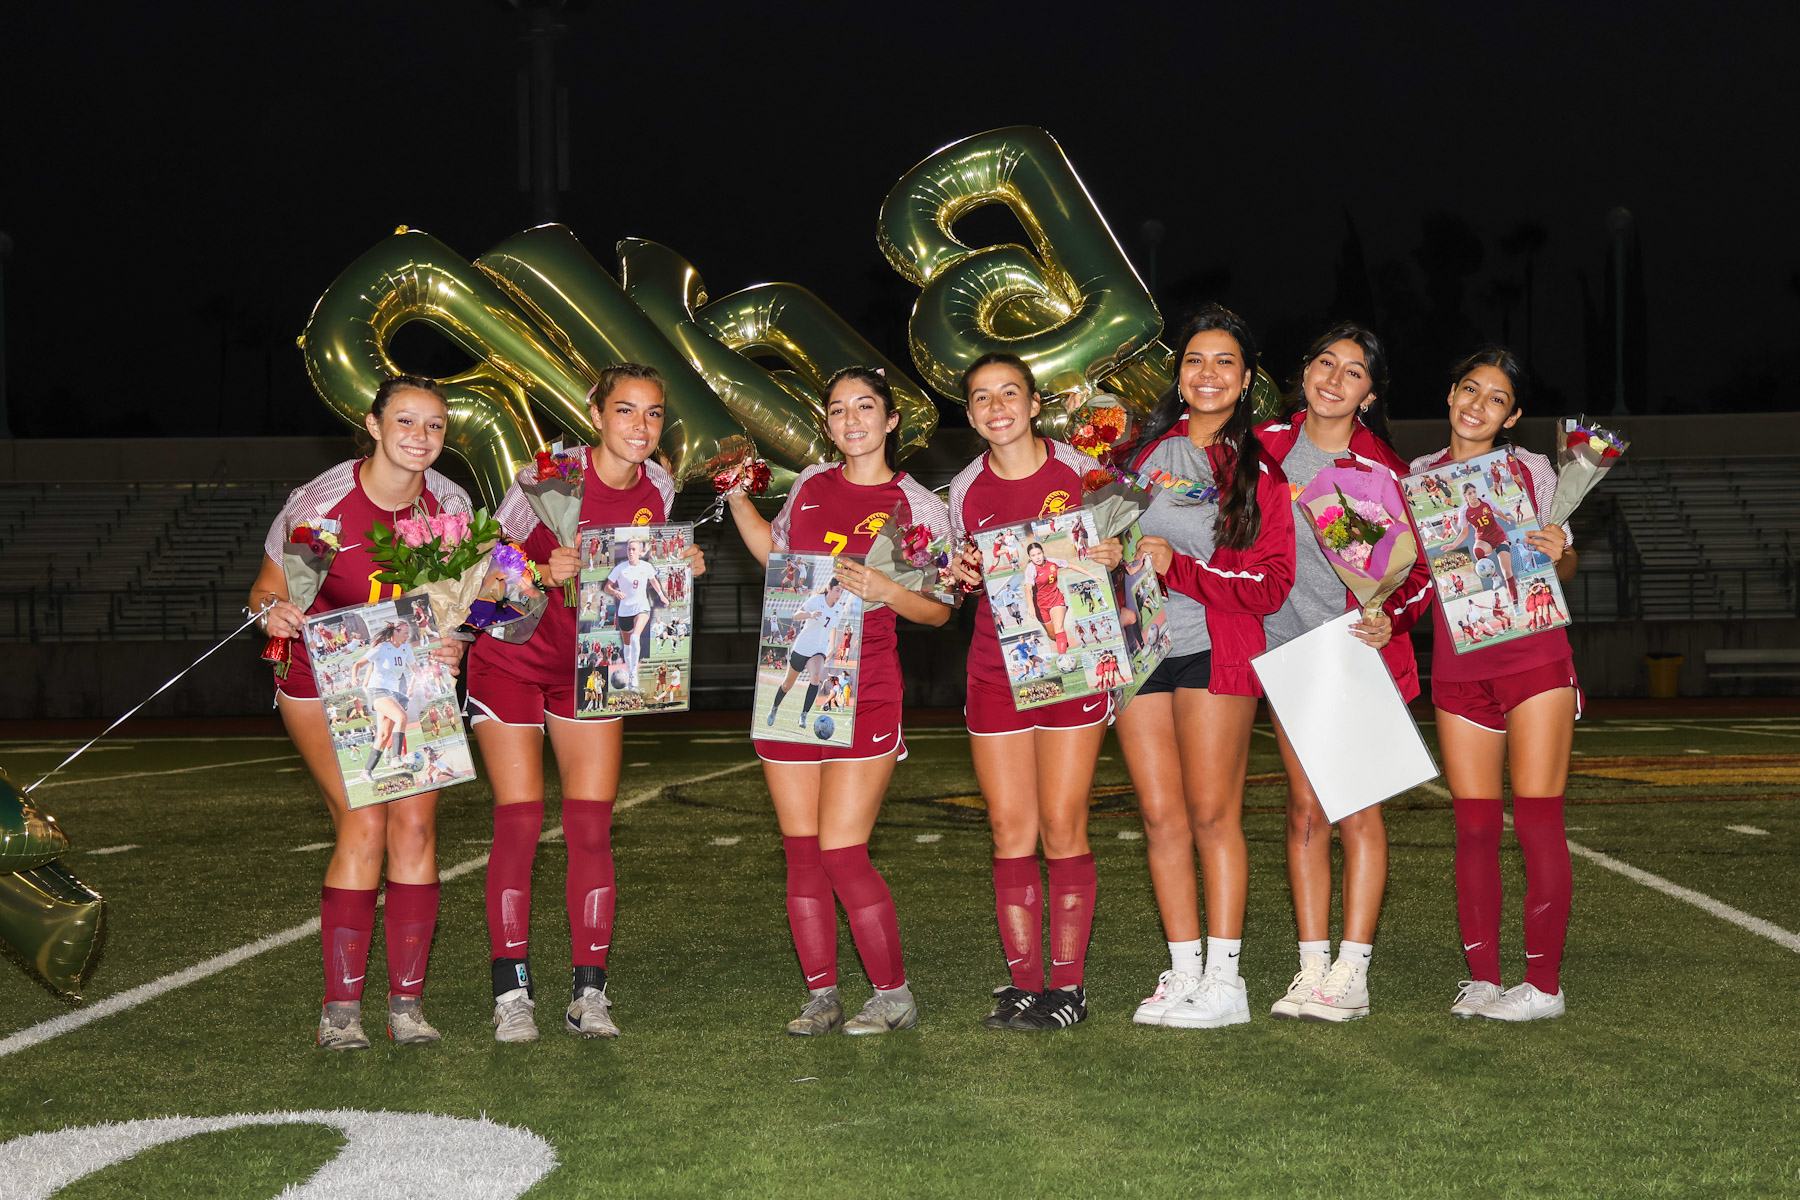 PCC's sophomores are honored here in a Friday night ceremony on Oct. 27 (photo by Richard Quinton).